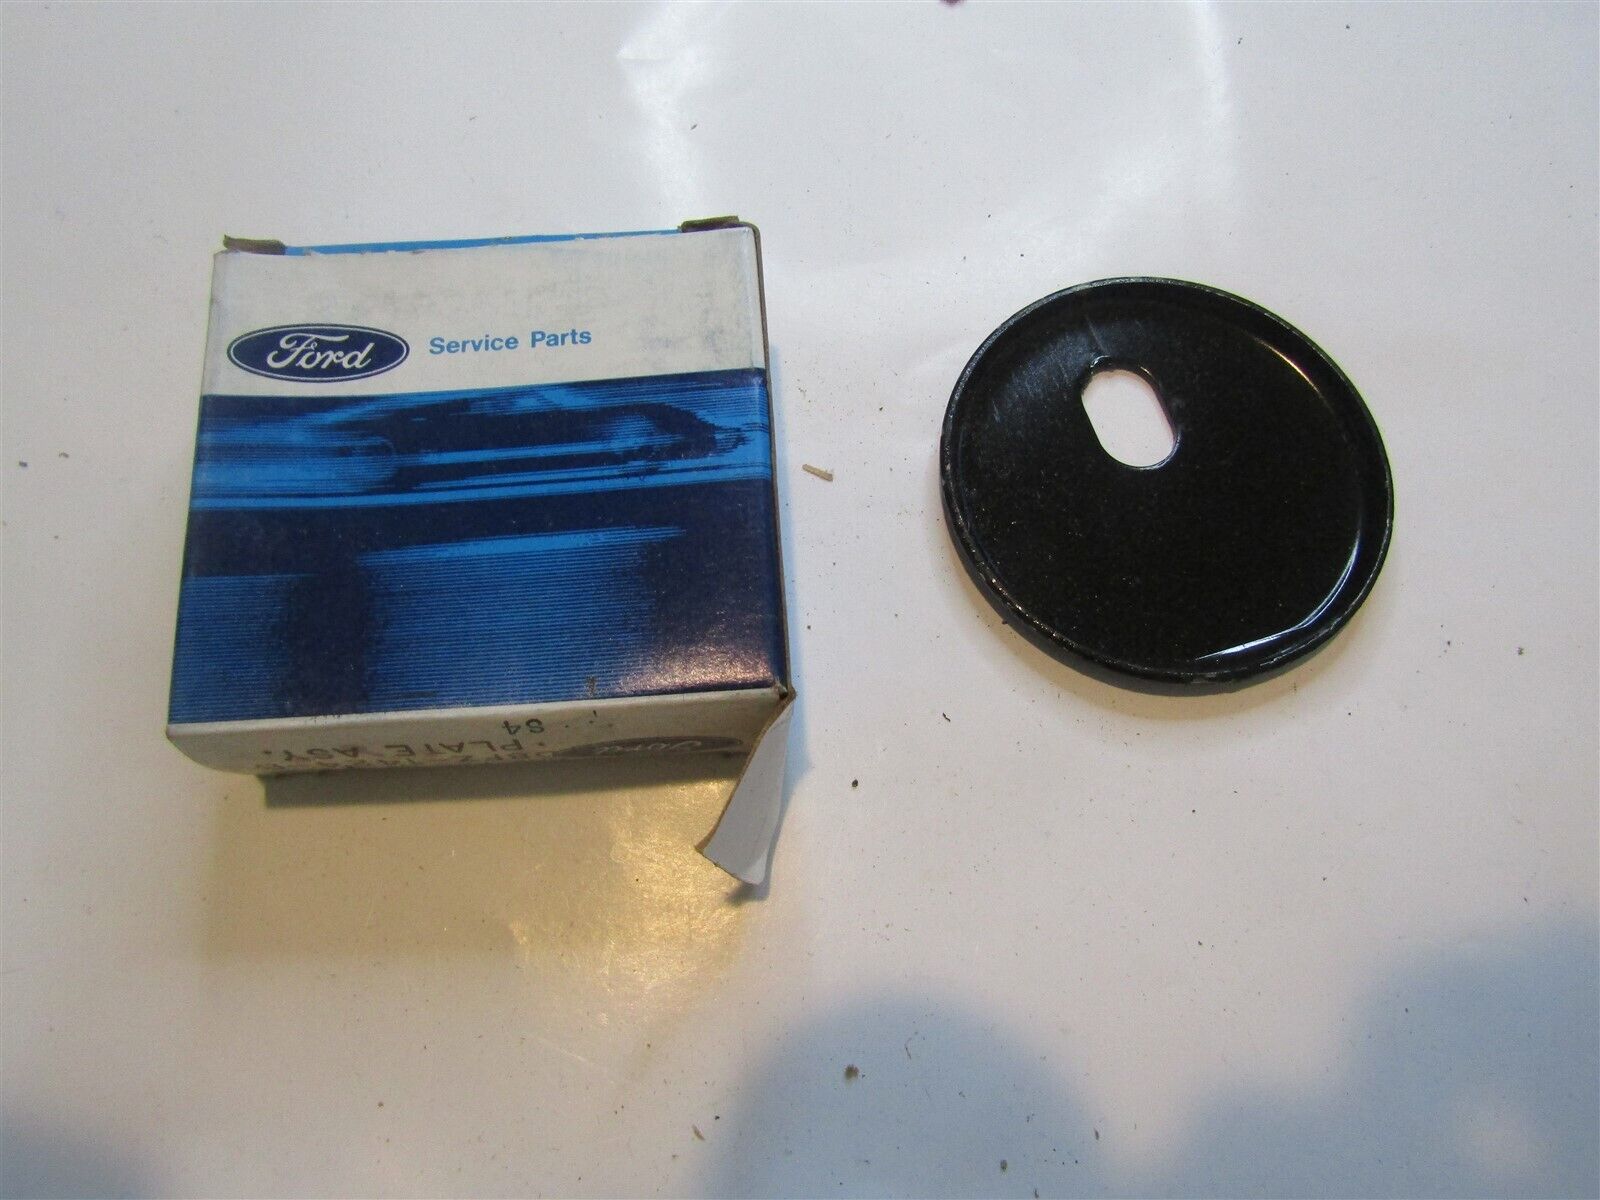 NOS 1974 - 1980 FORD PINTO MERCURY BOBCAT SPARE WHEEL TIRE RETAINER PLATE 